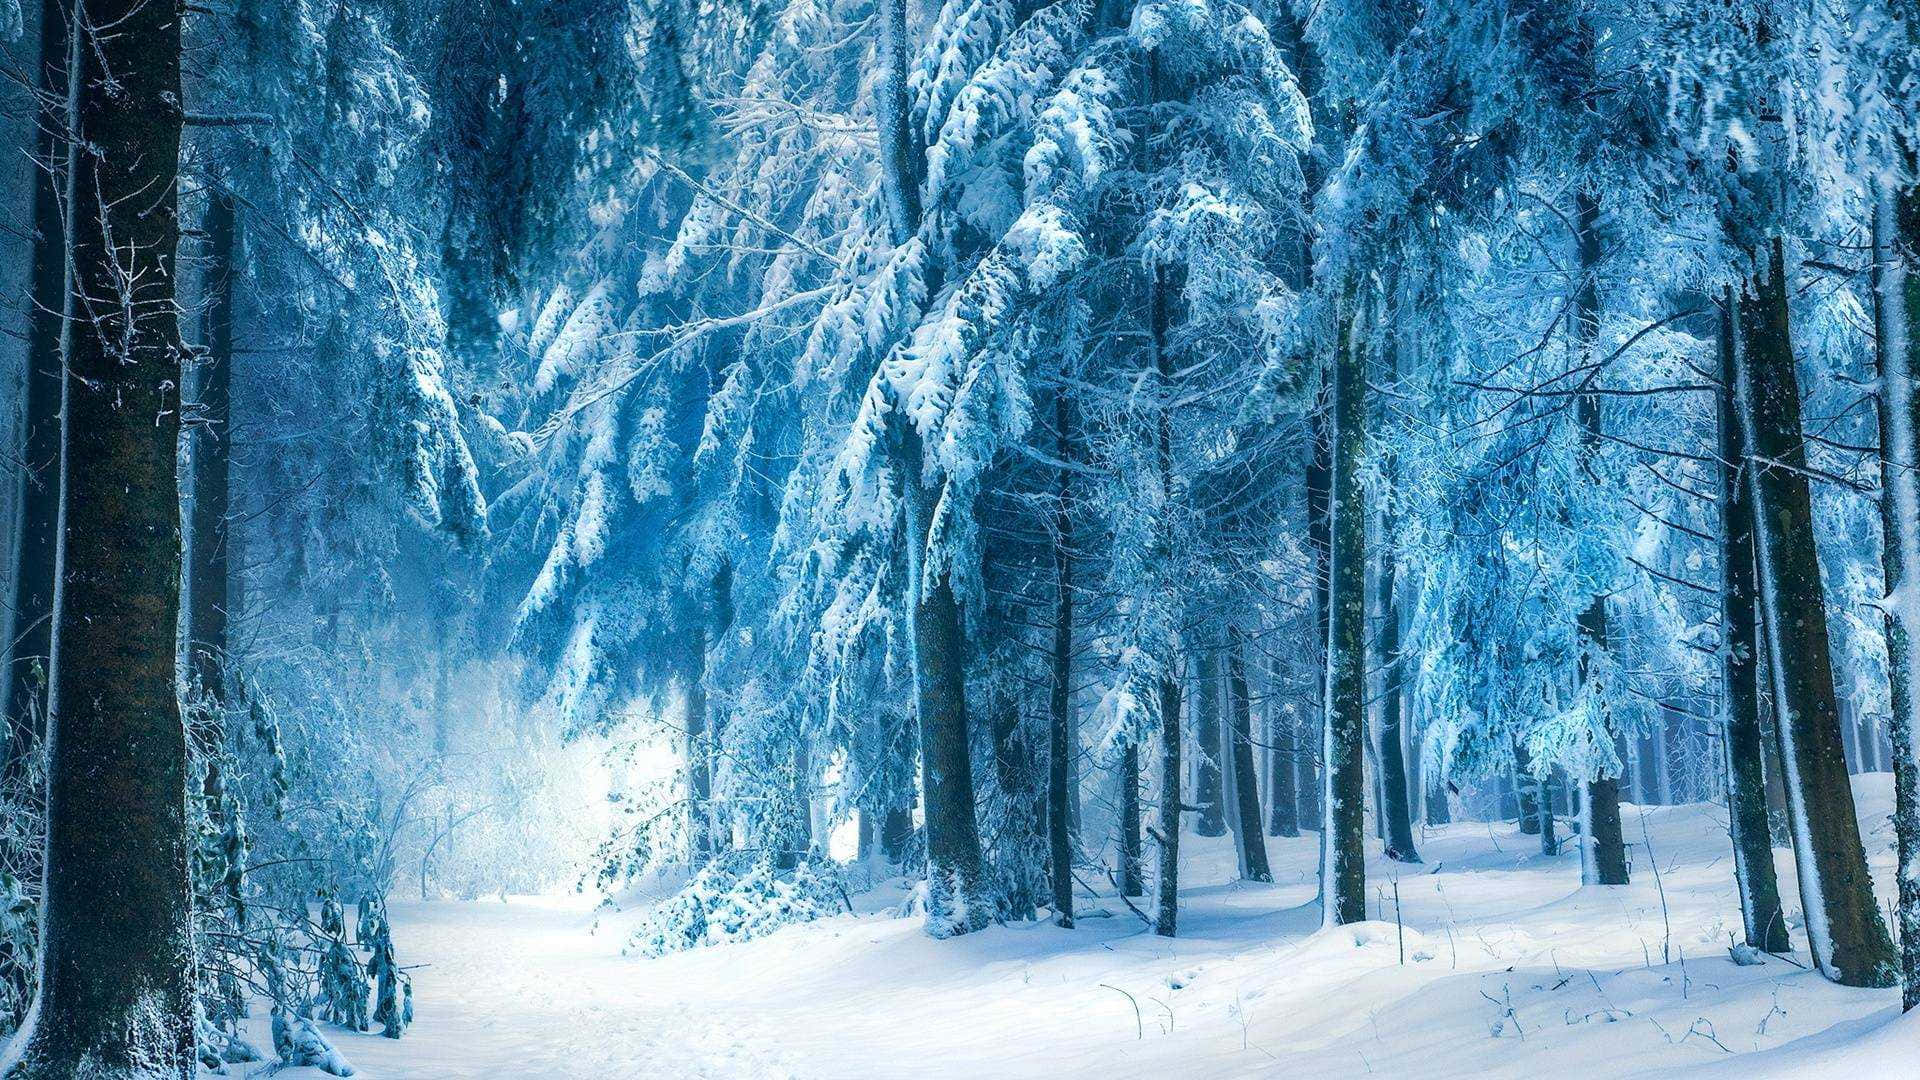 Explore the beauty of a snowy forest this winter.